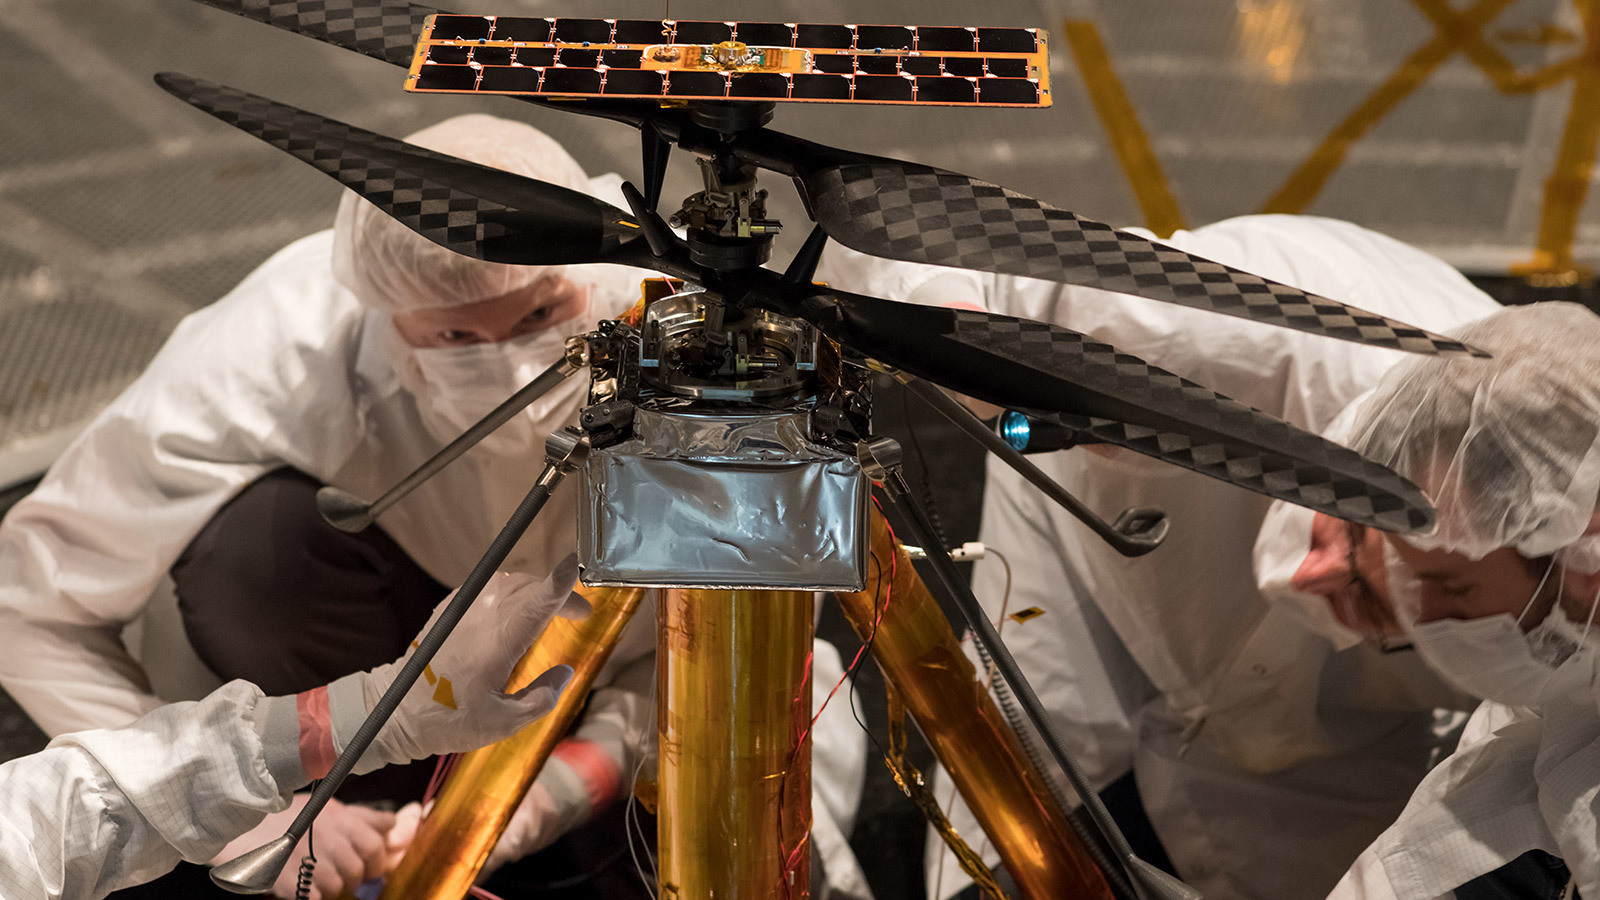 NASA's Mars Helicopter Completes Flight Tests